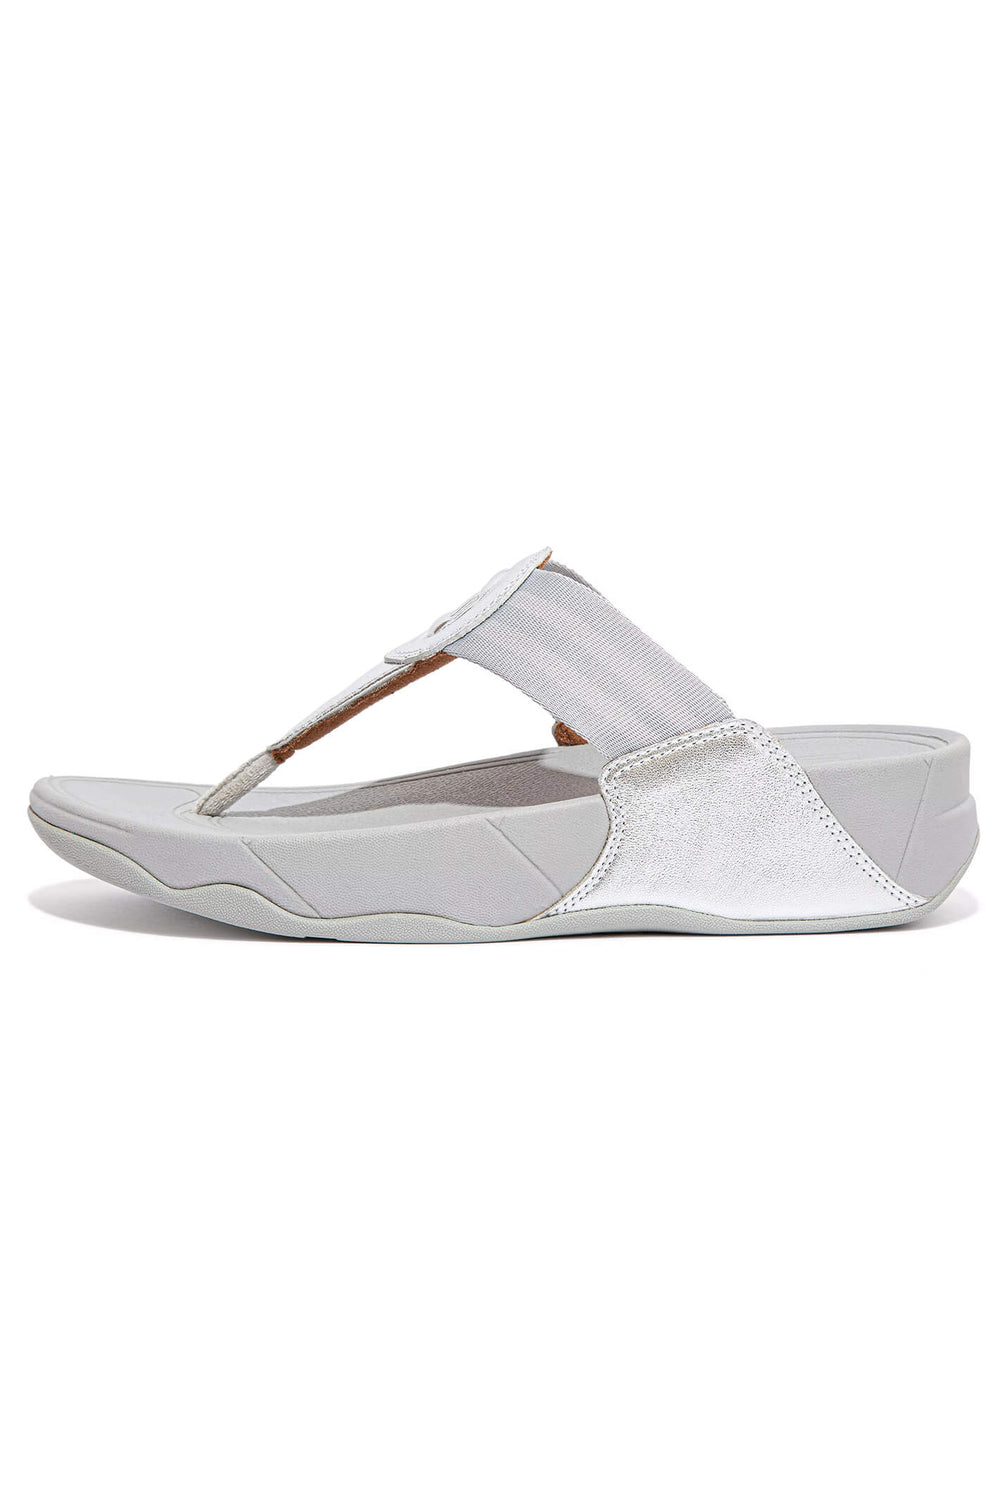 Fitflop Walkstar DX4-011 Toe-Post Silver Sandal - Shirley Allum Boutique